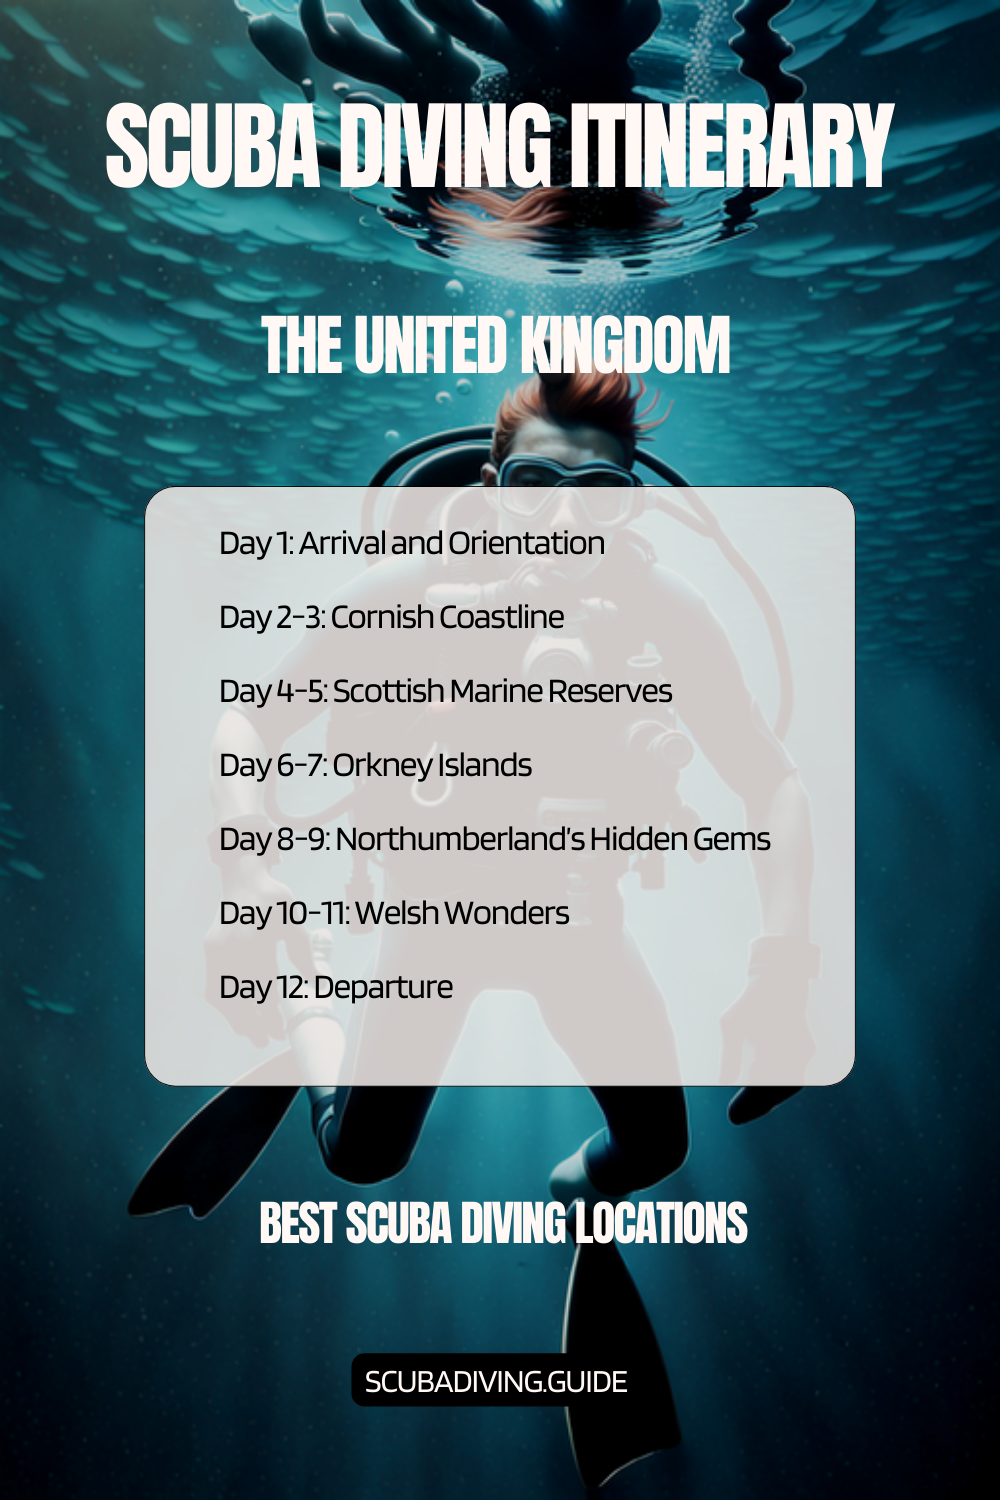 United Kingdom Recommended Scuba Diving Itinerary